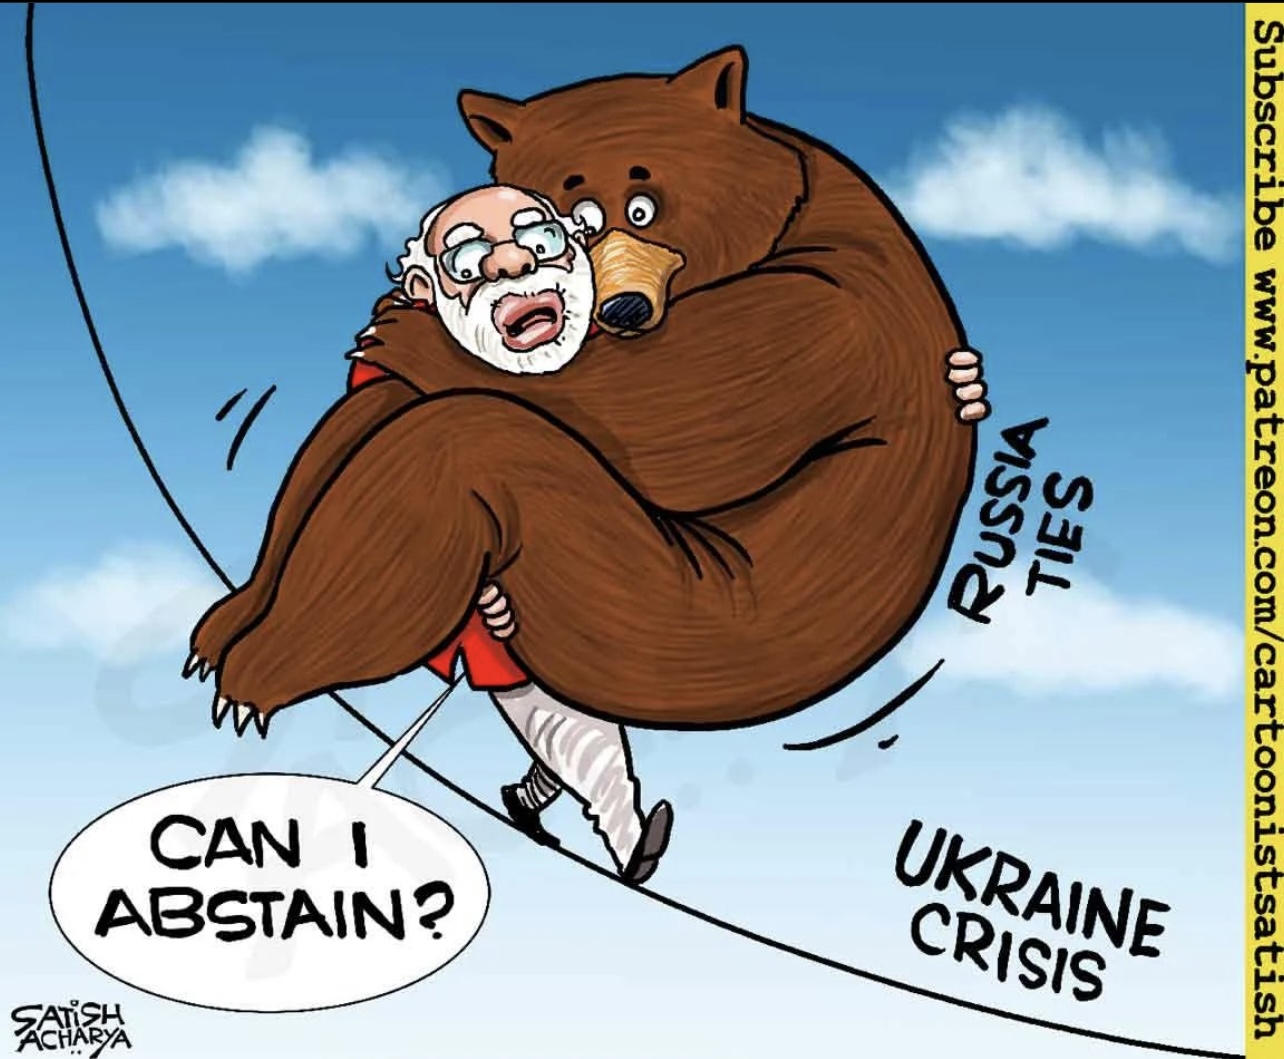 India abstaining from taking a stance on the Russia-Ukraine crisis